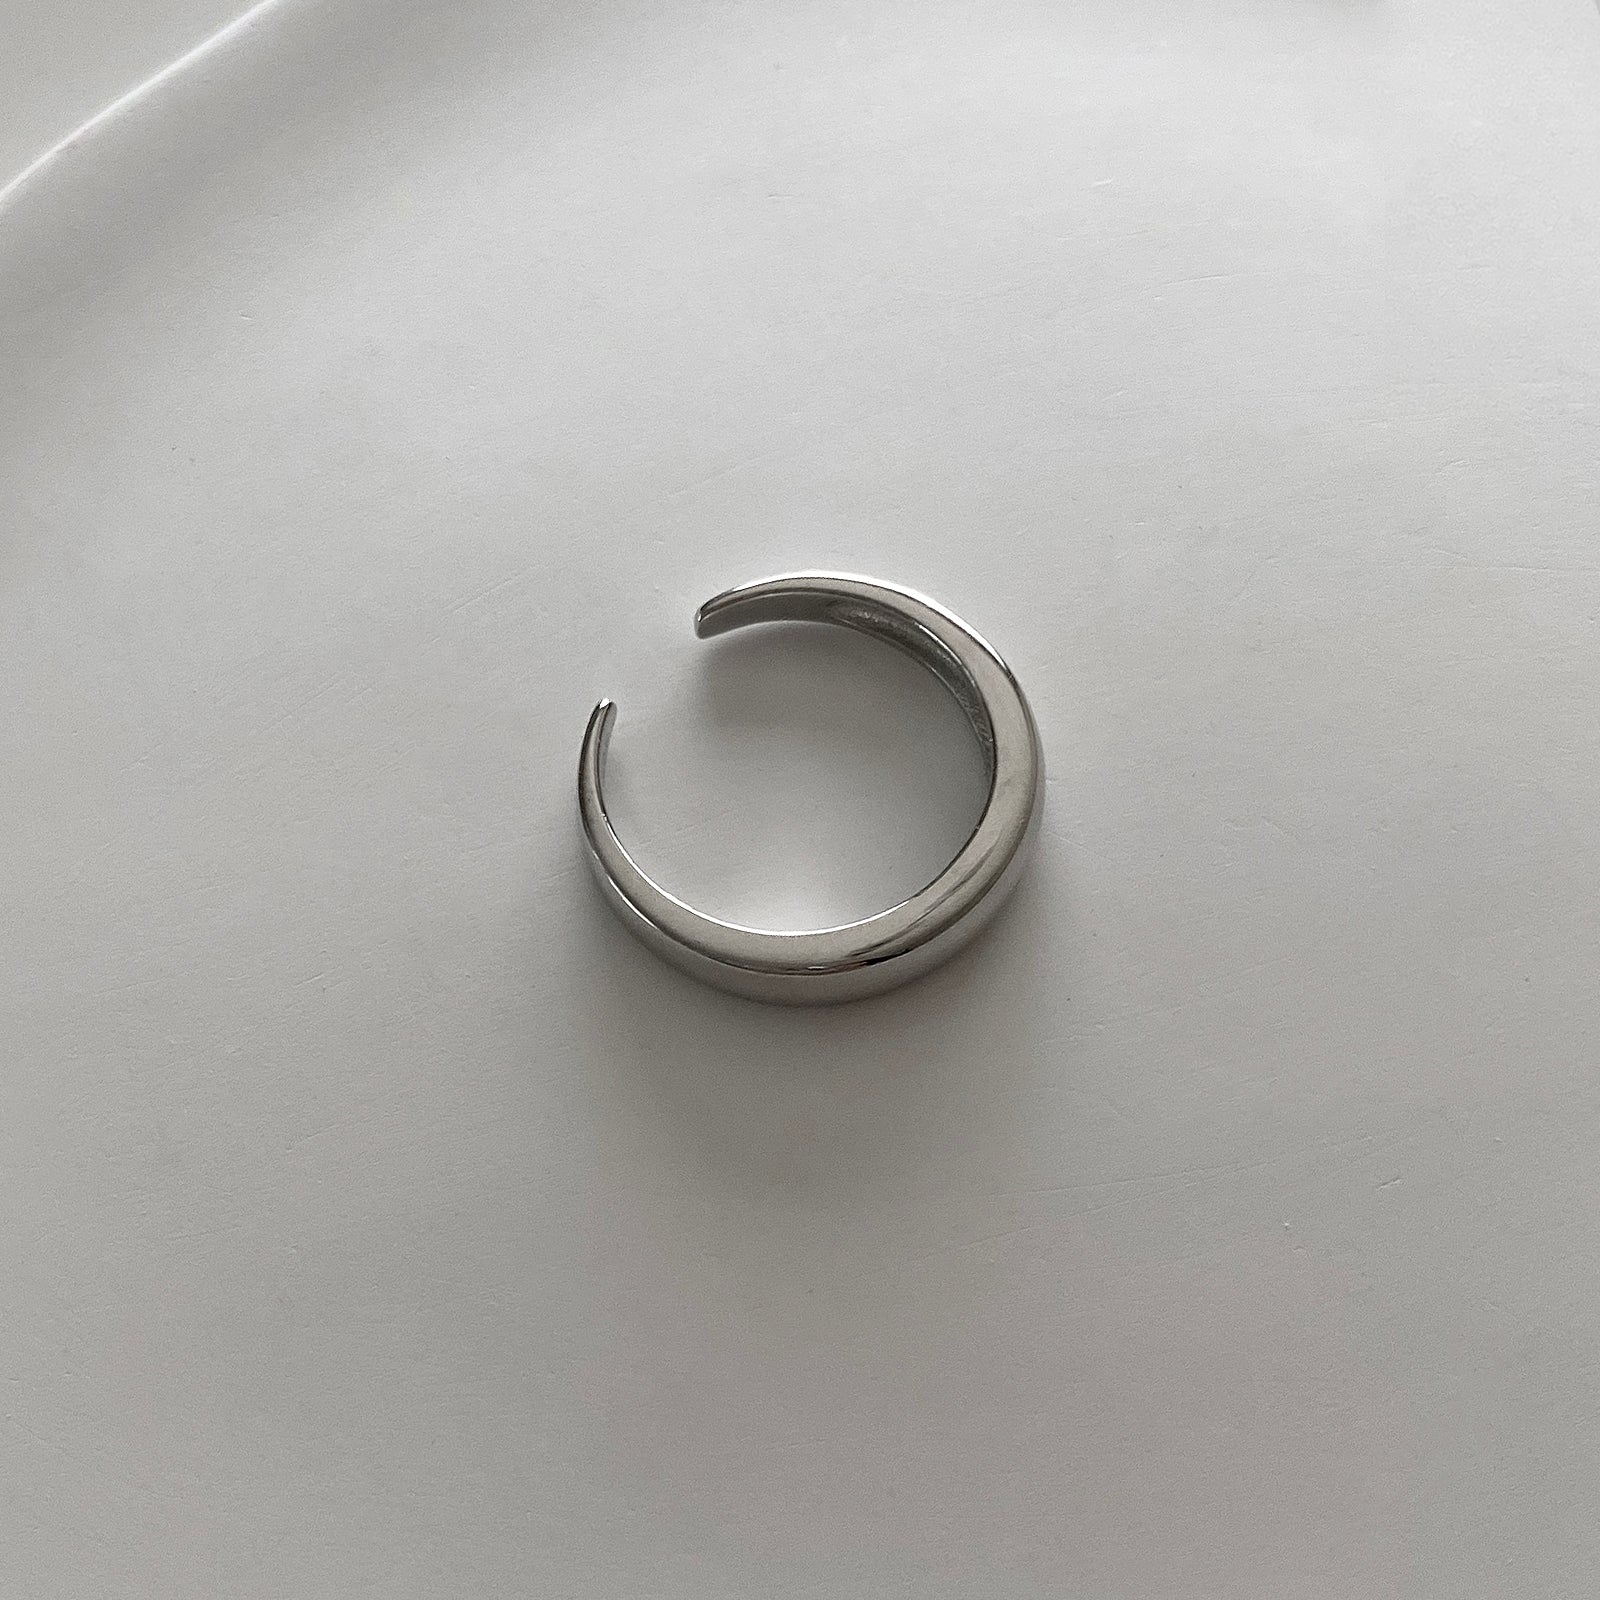 Classic Ring in silver 925 with an opening to adjust to your size.